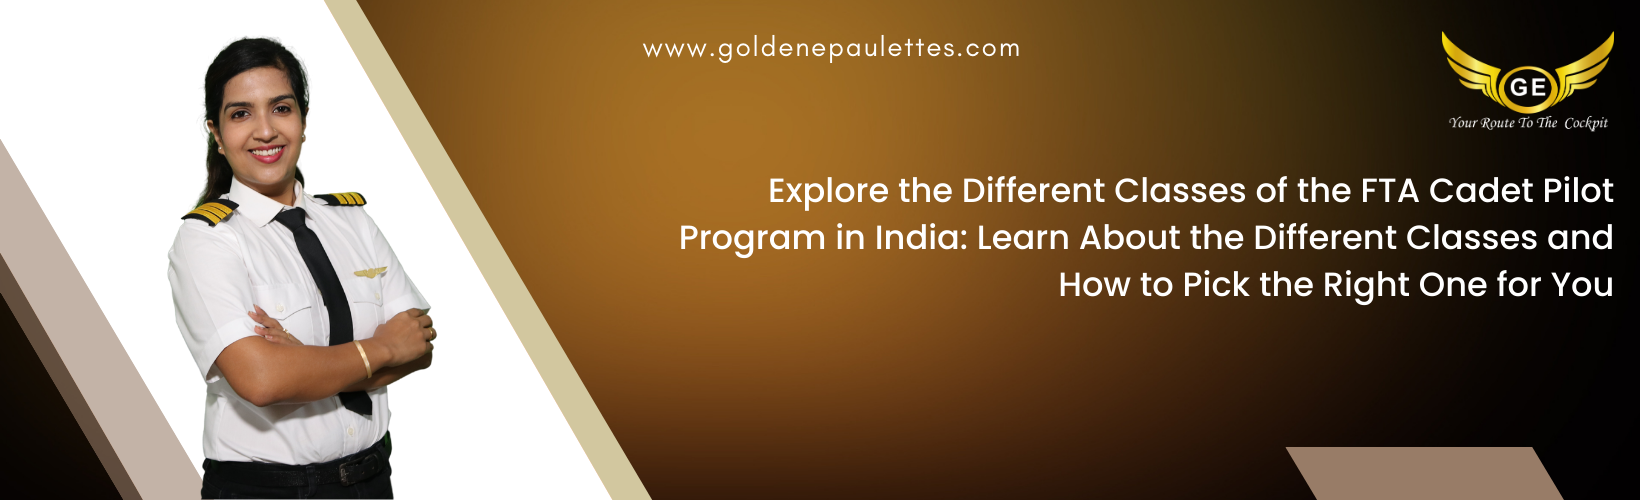 Exploring the Different Classes Available in India for the FTA Cadet Pilot Program